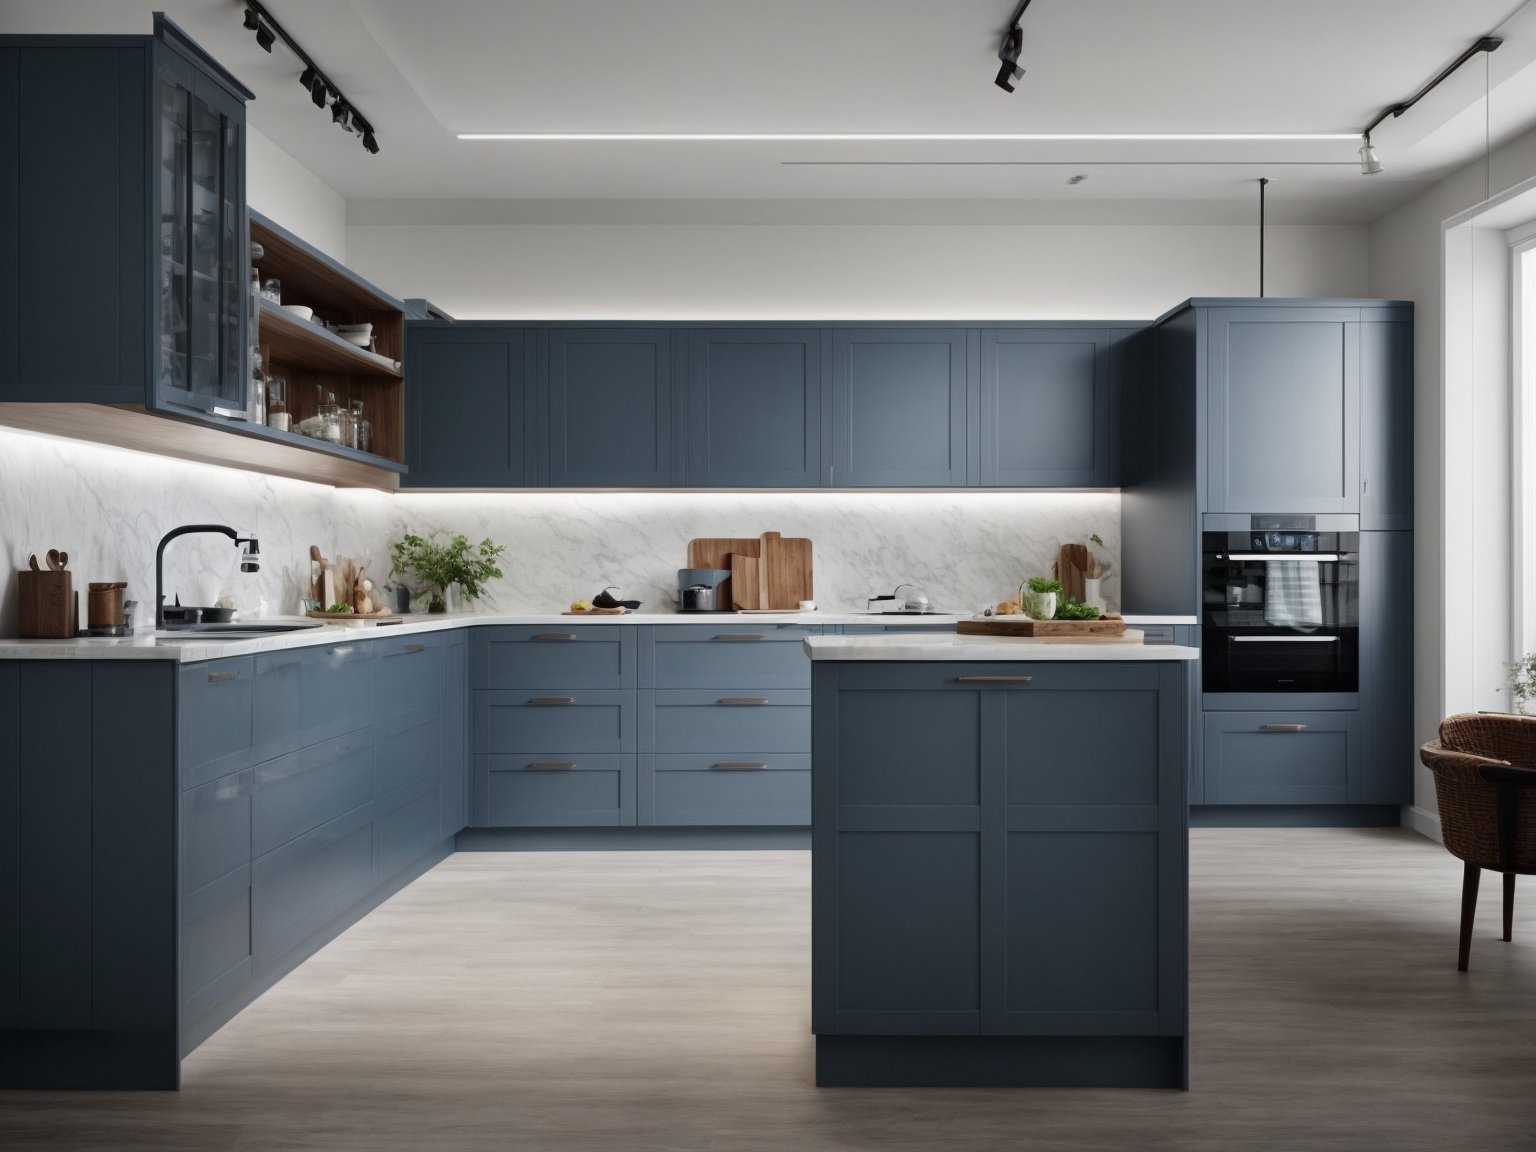 A close-up image of bluish grey kitchen cabinets with a modern, minimalist design.